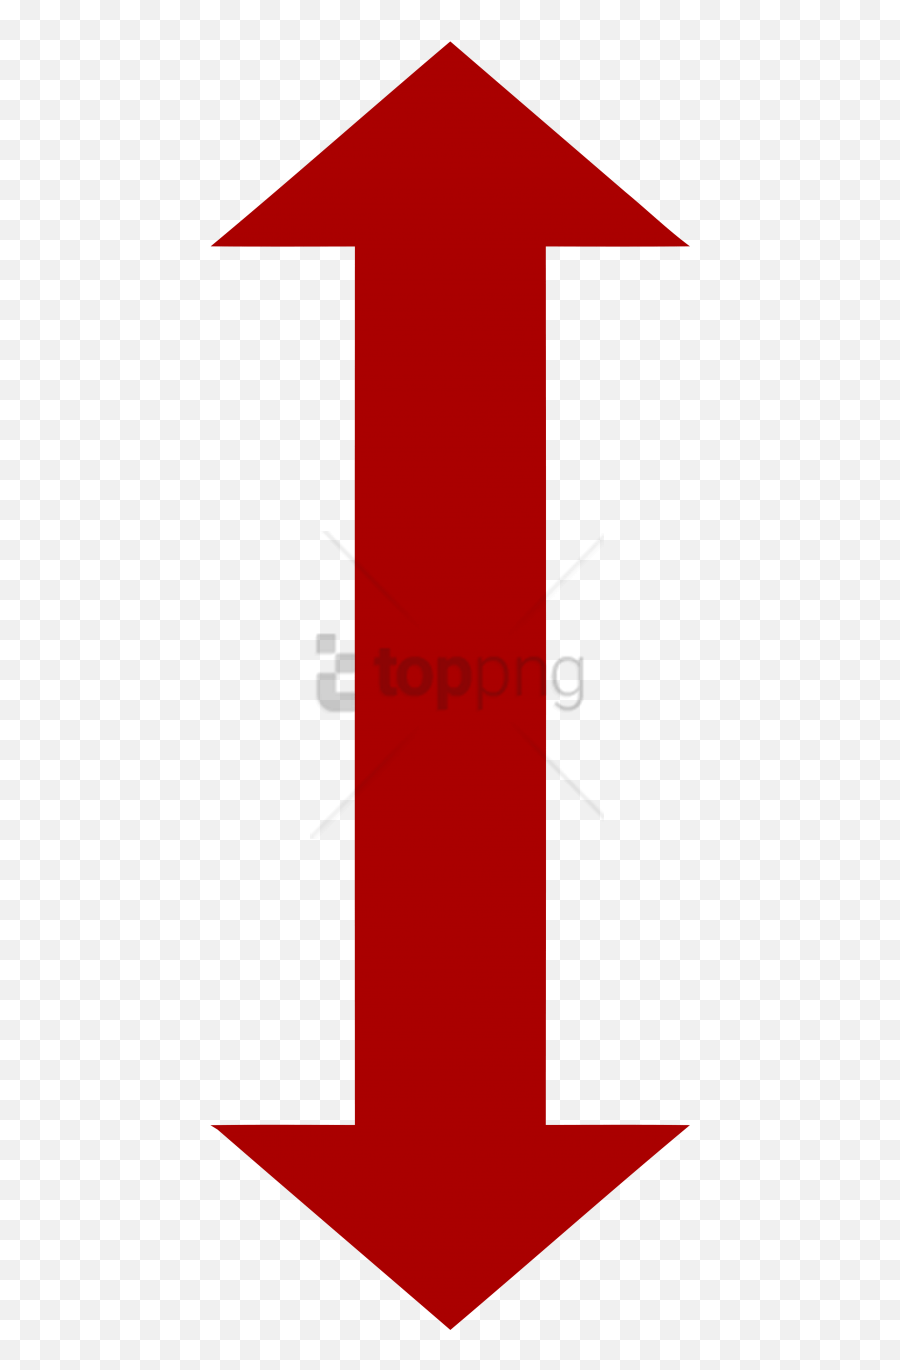 Download Free Png Two Way Red Arrow Png Image With - Vertical Emoji,Red Arrow Png